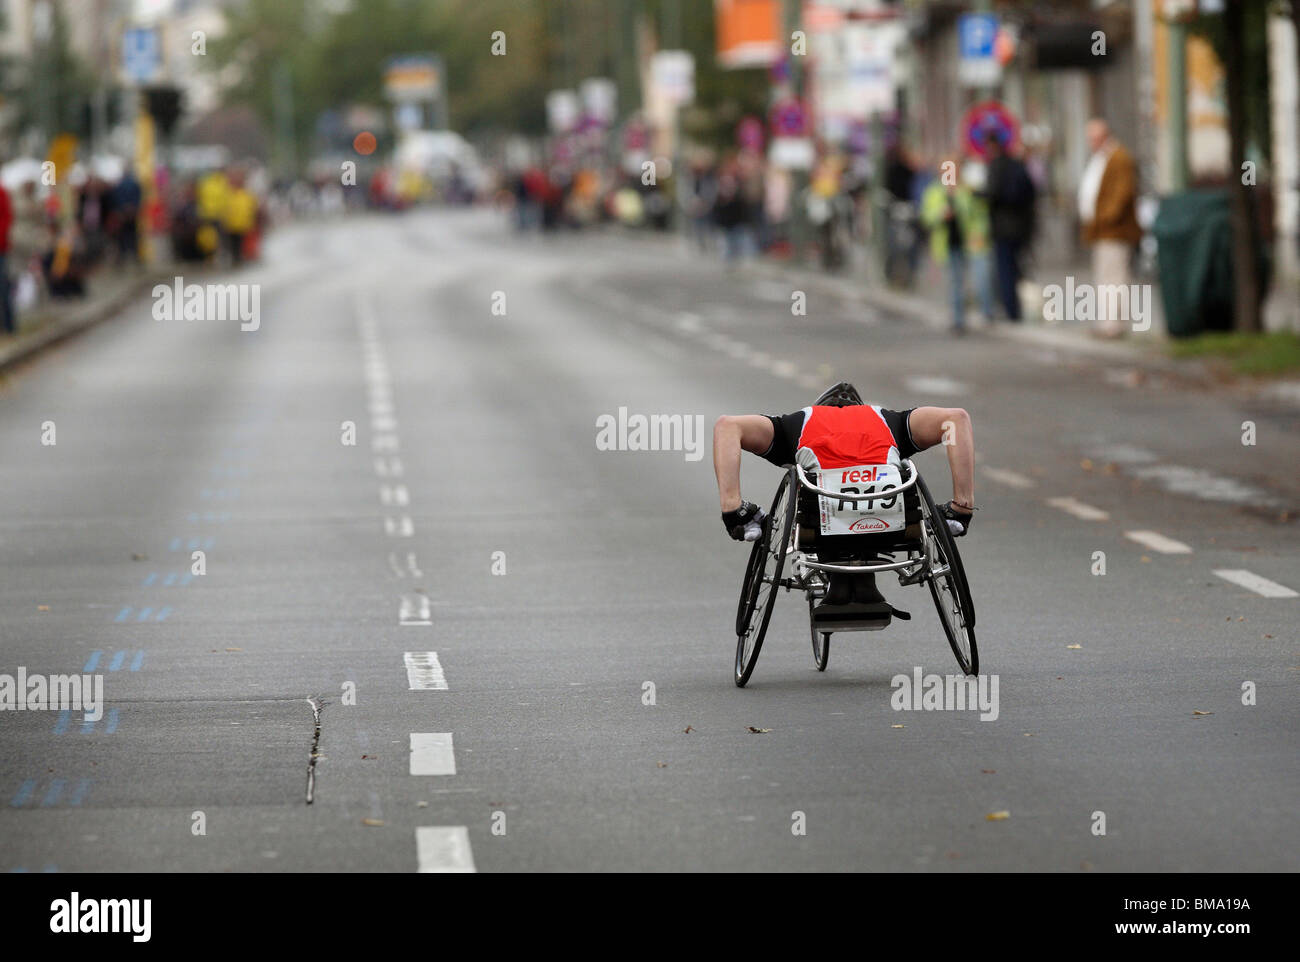 A man on a wheelchair taking part in a marathon, Berlin, Germany Stock Photo